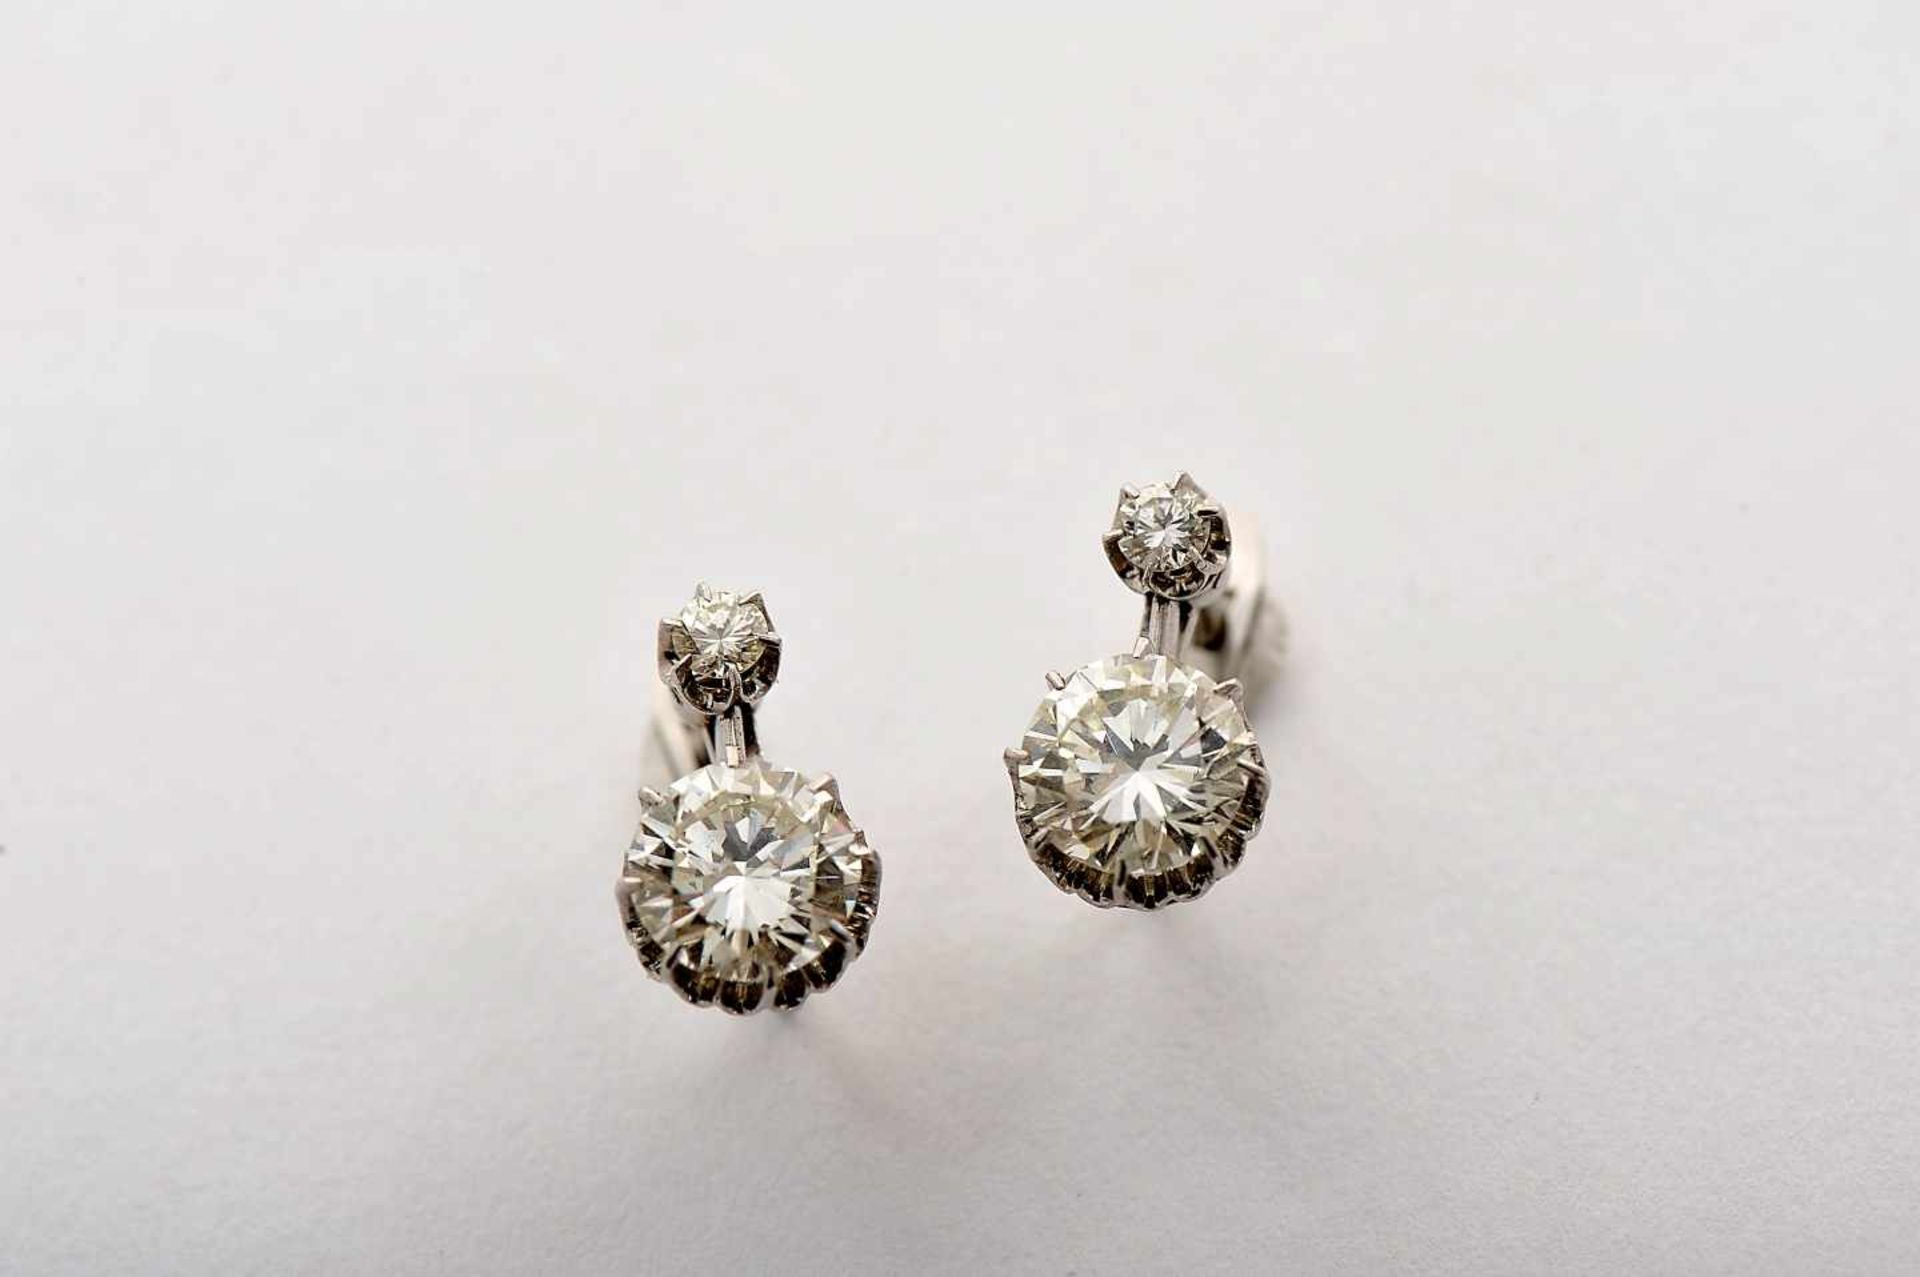 A Pair of EarringsA Pair of Earrings, 500/1000 platinum, set with 2 brilliant cut diamonds with an - Image 2 of 3